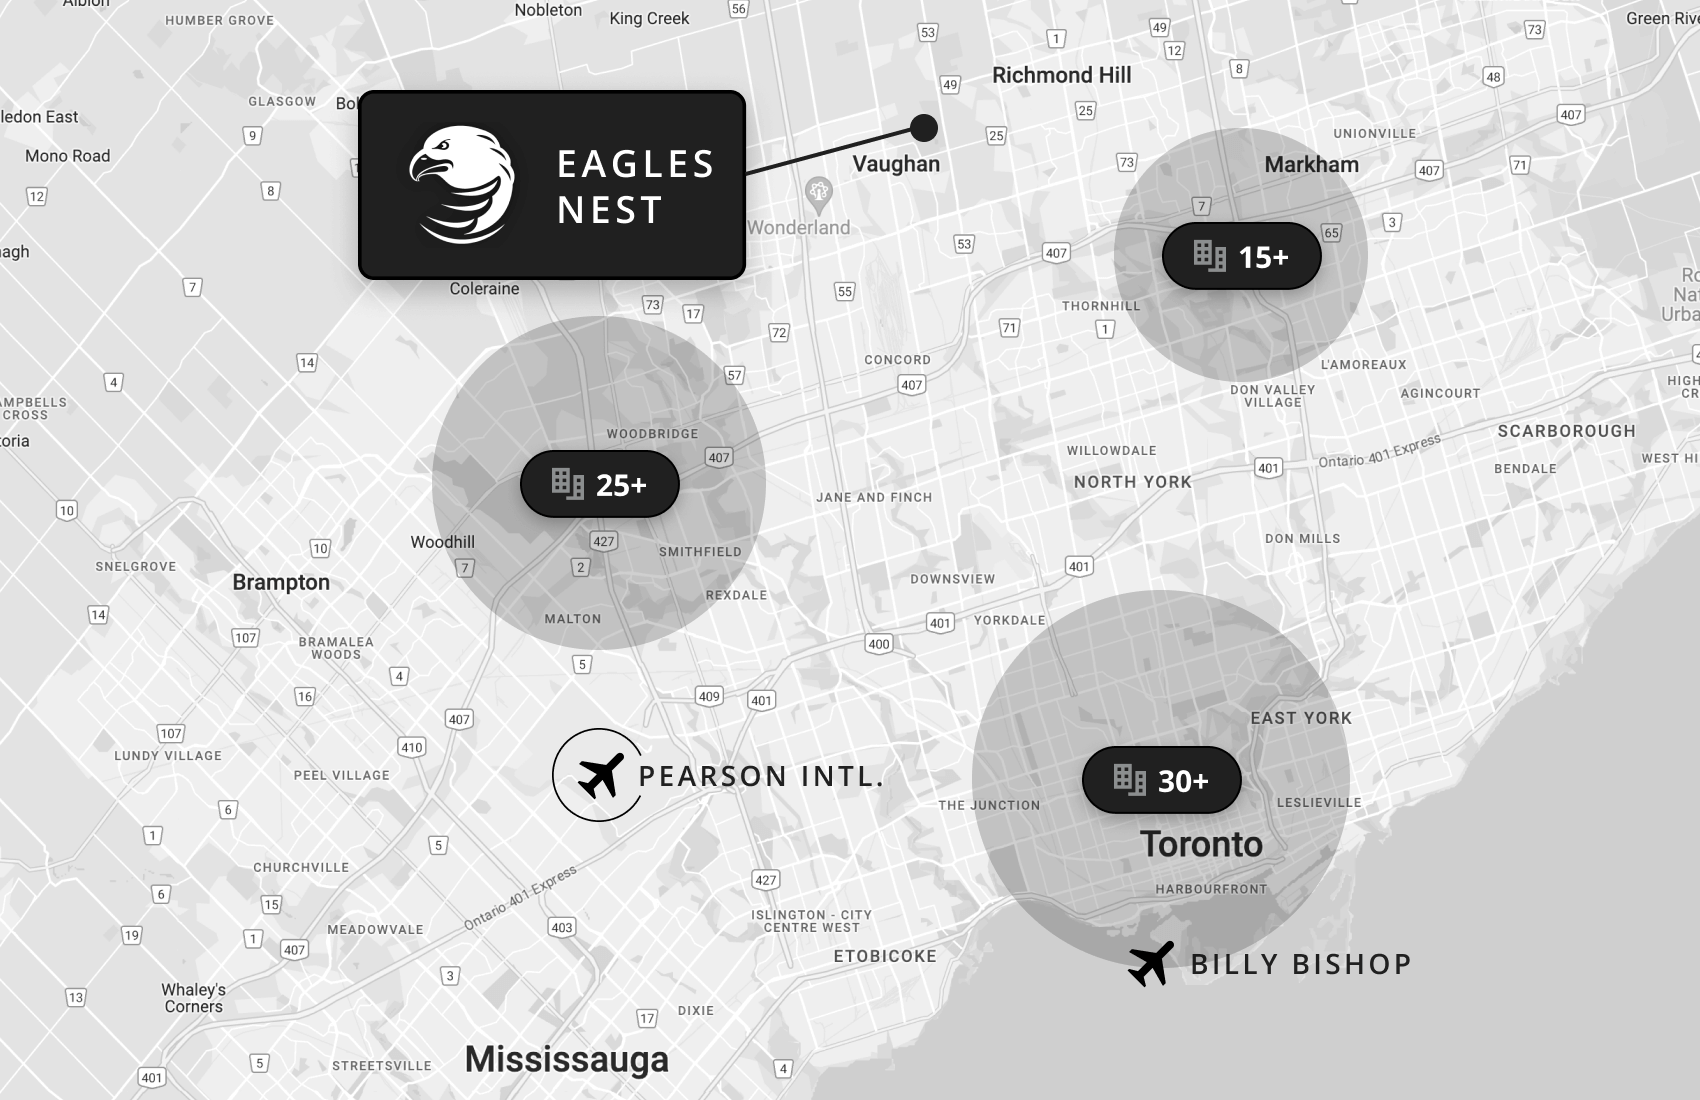 Eagles Nest location relative to airports, hotels and major highways